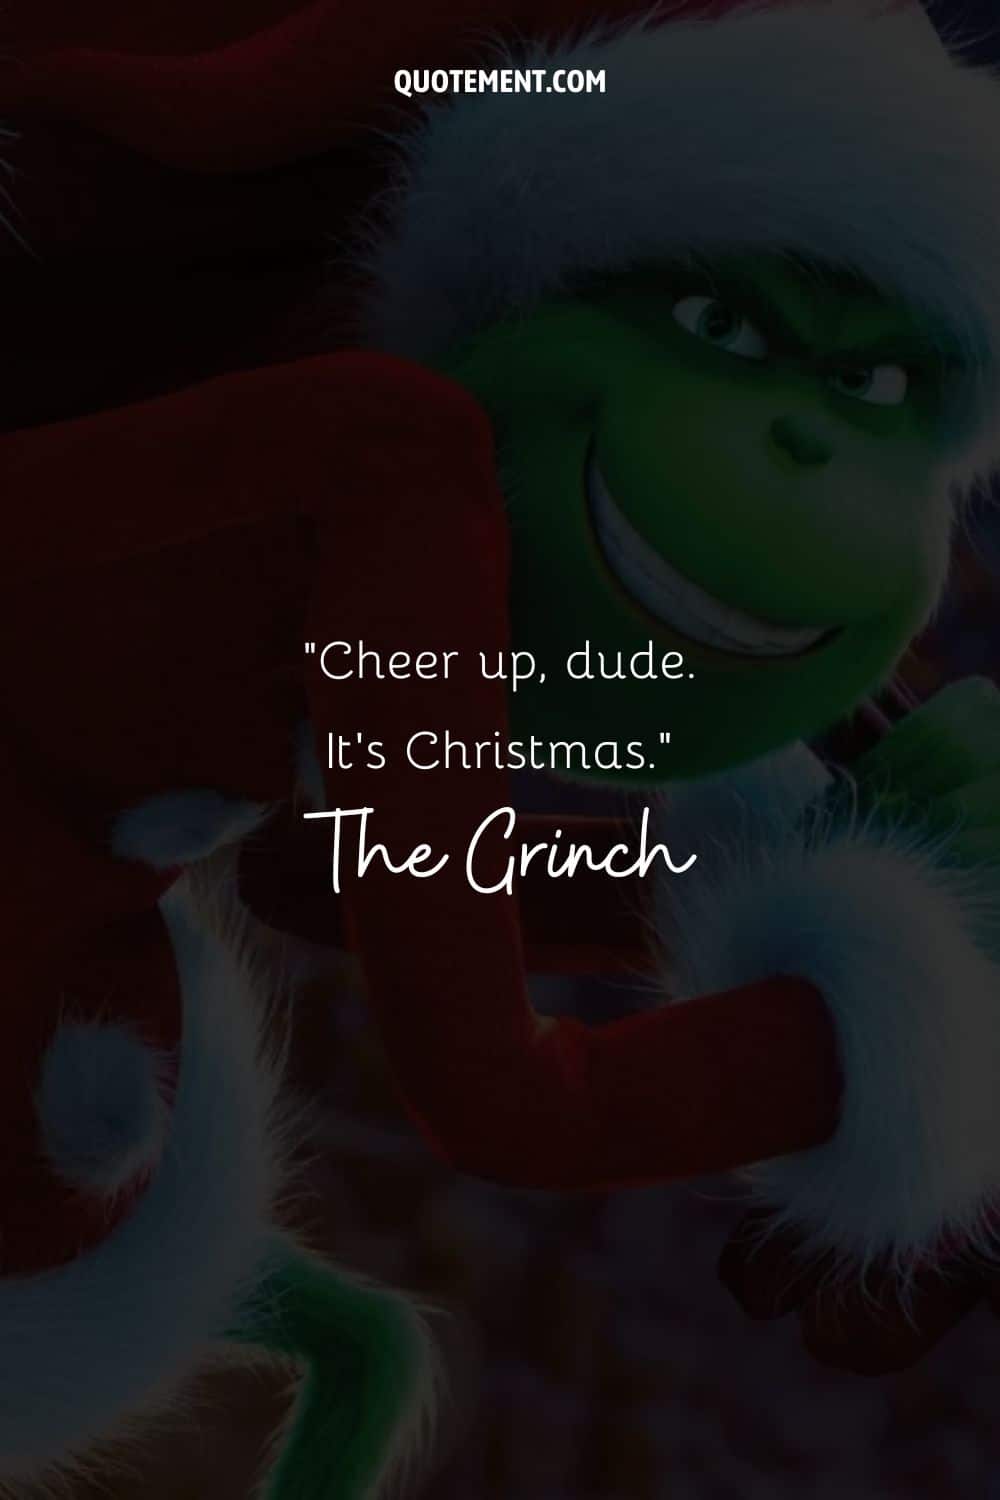 Cheer up, dude. It’s Christmas